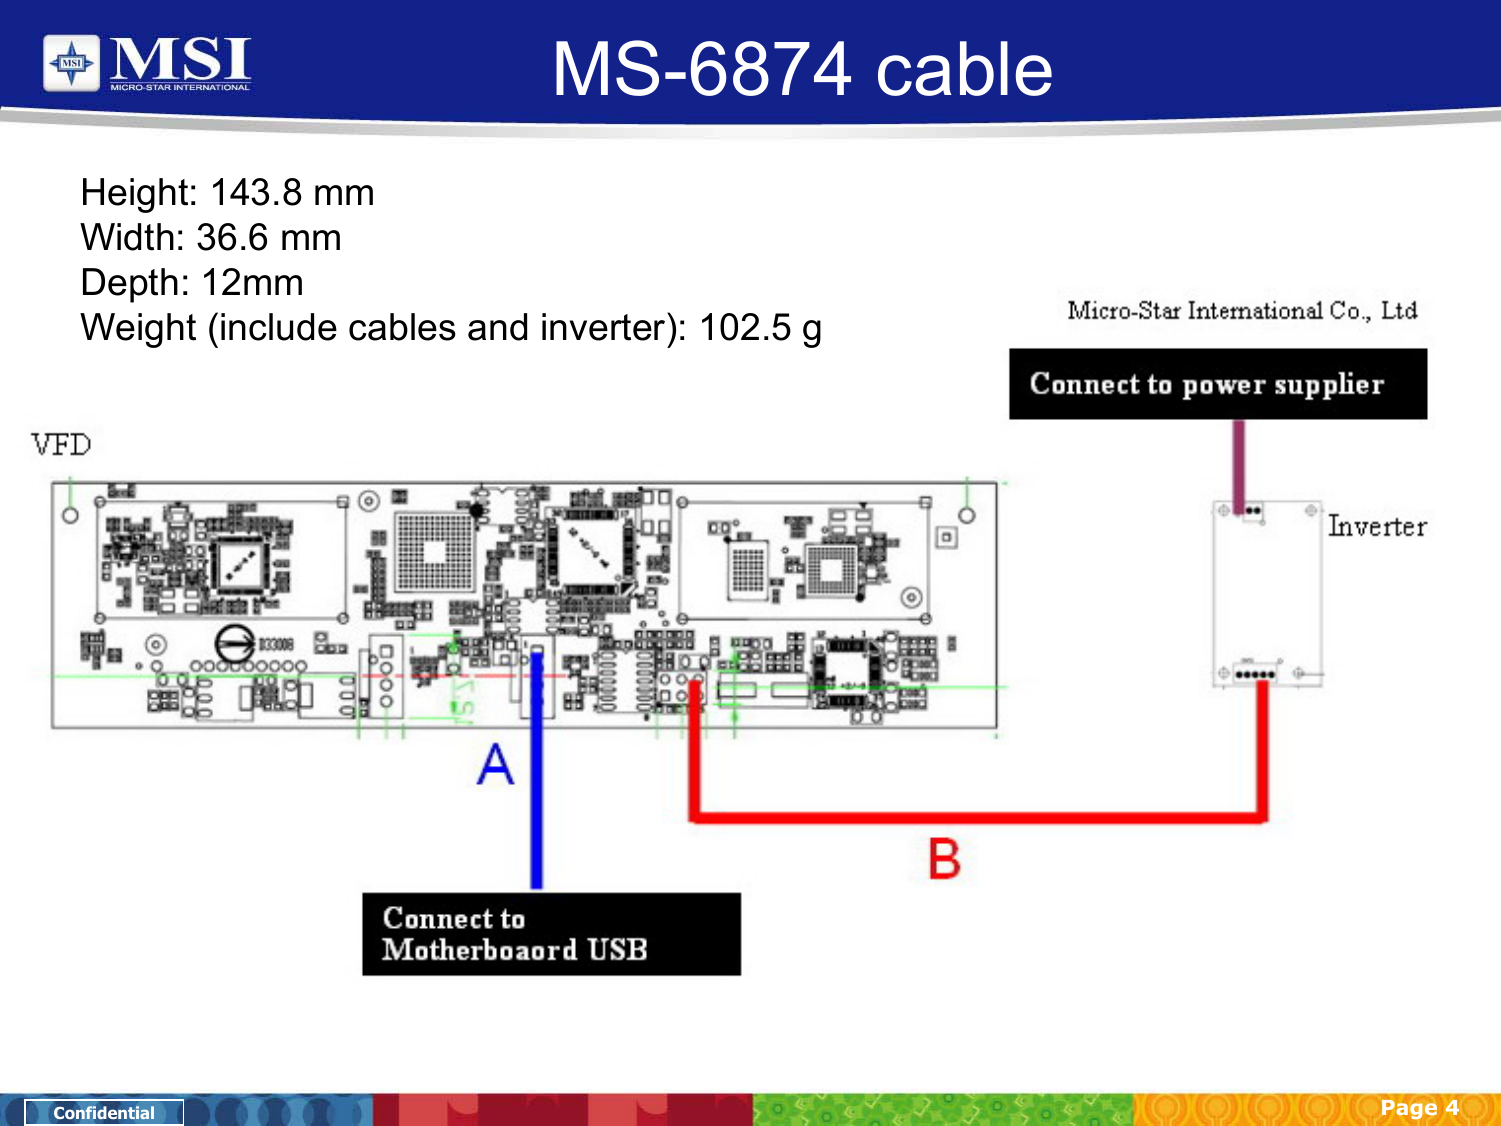 Page 4ConfidentialMS-6874 cableHeight: 143.8 mmWidth: 36.6 mmDepth: 12mmWeight (include cables and inverter): 102.5 g